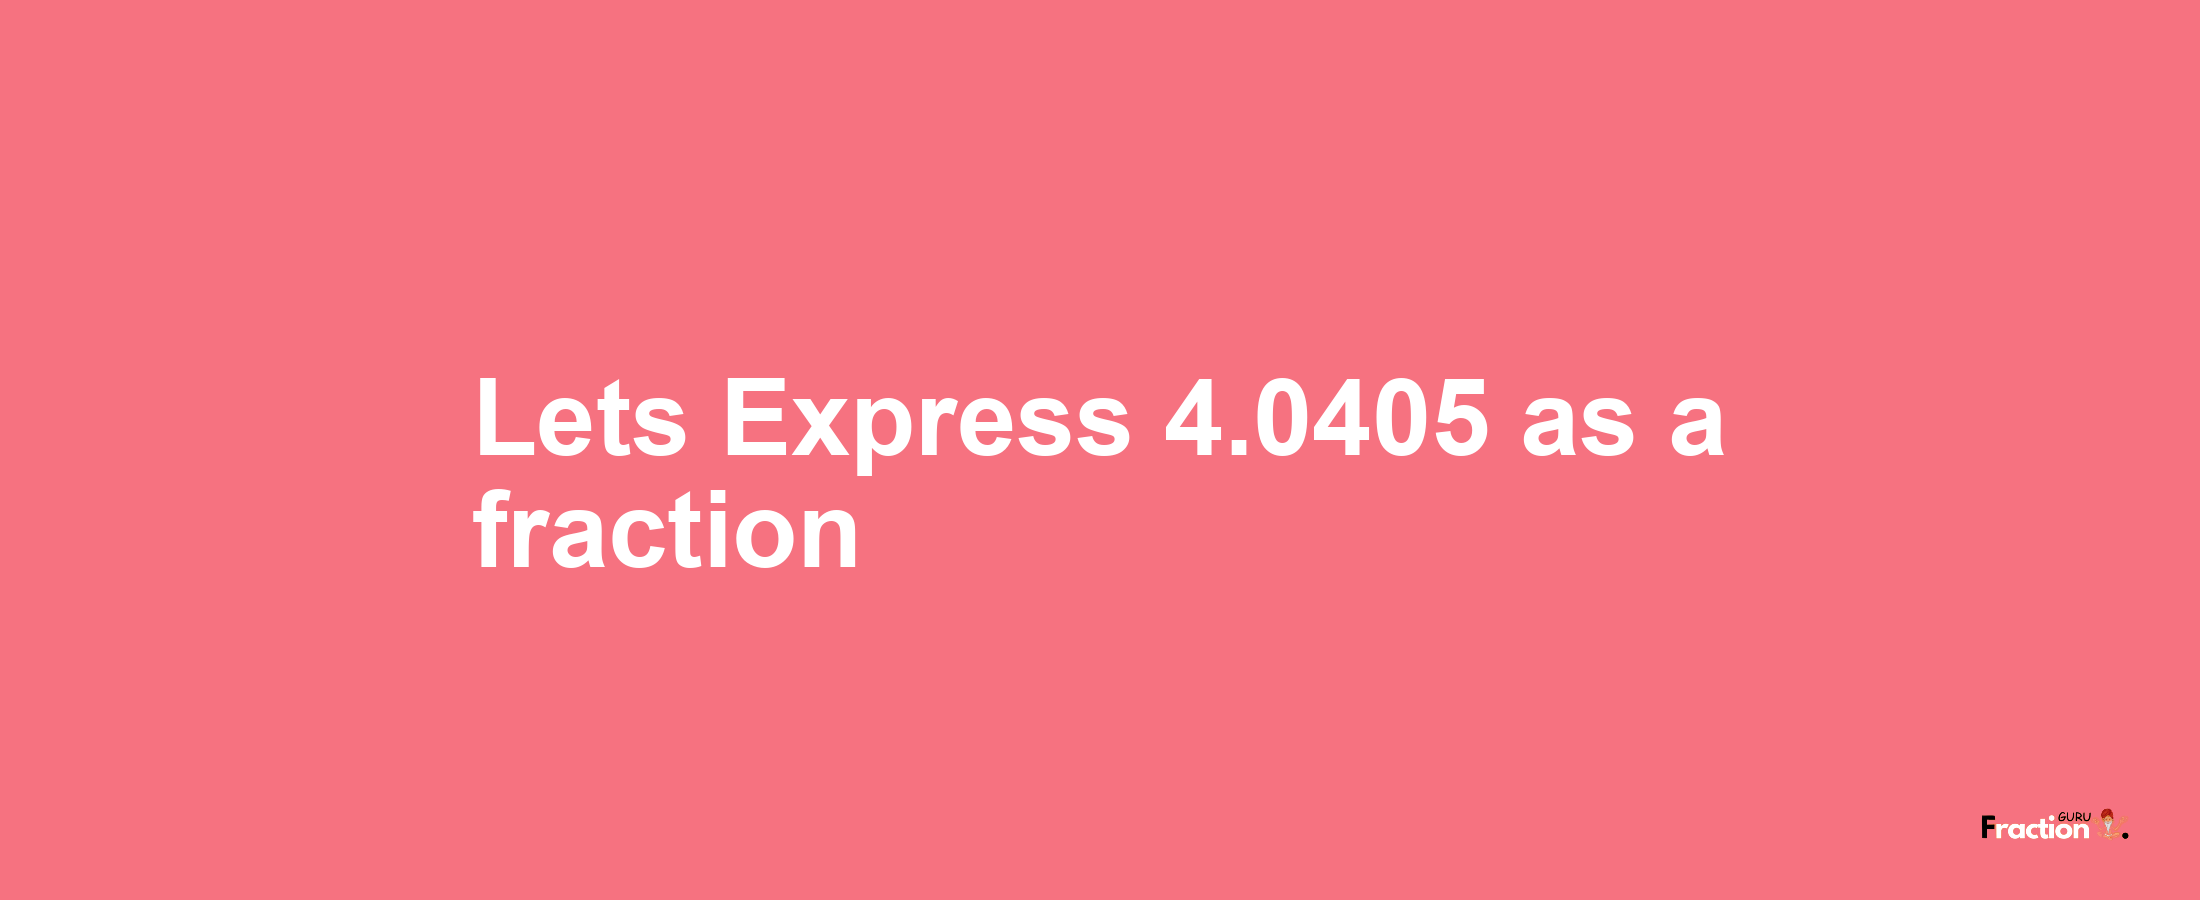 Lets Express 4.0405 as afraction